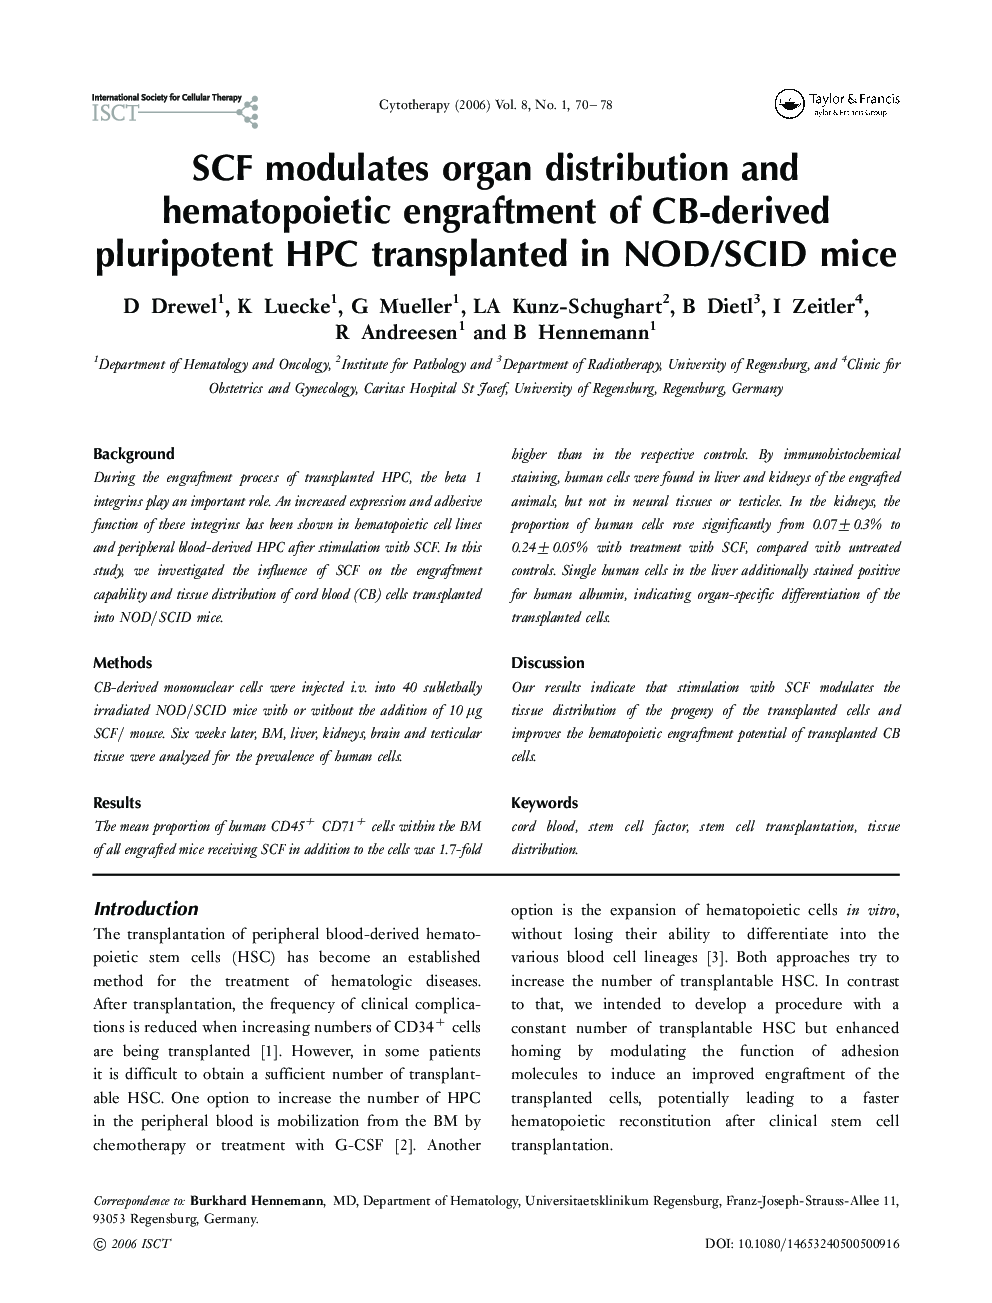 SCF modulates organ distribution and hematopoietic engraftment of CB-derived pluripotent HPC transplanted in NOD/SCID mice